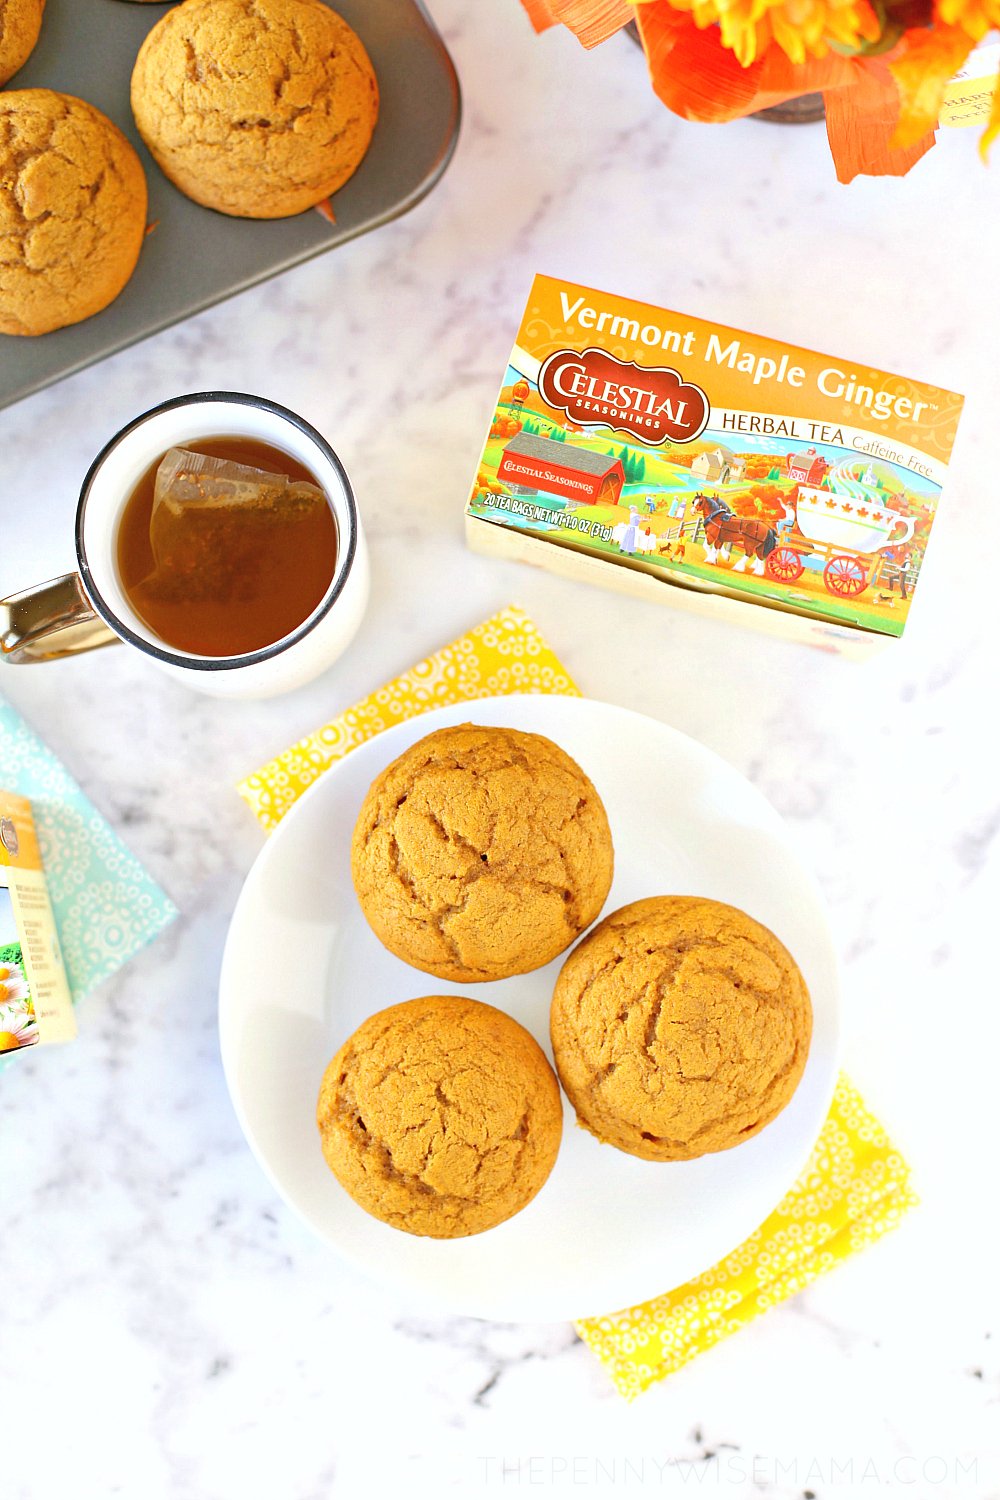 Flavors of Fall: The BEST Pumpkin Muffins + Vermont Maple Ginger Tea